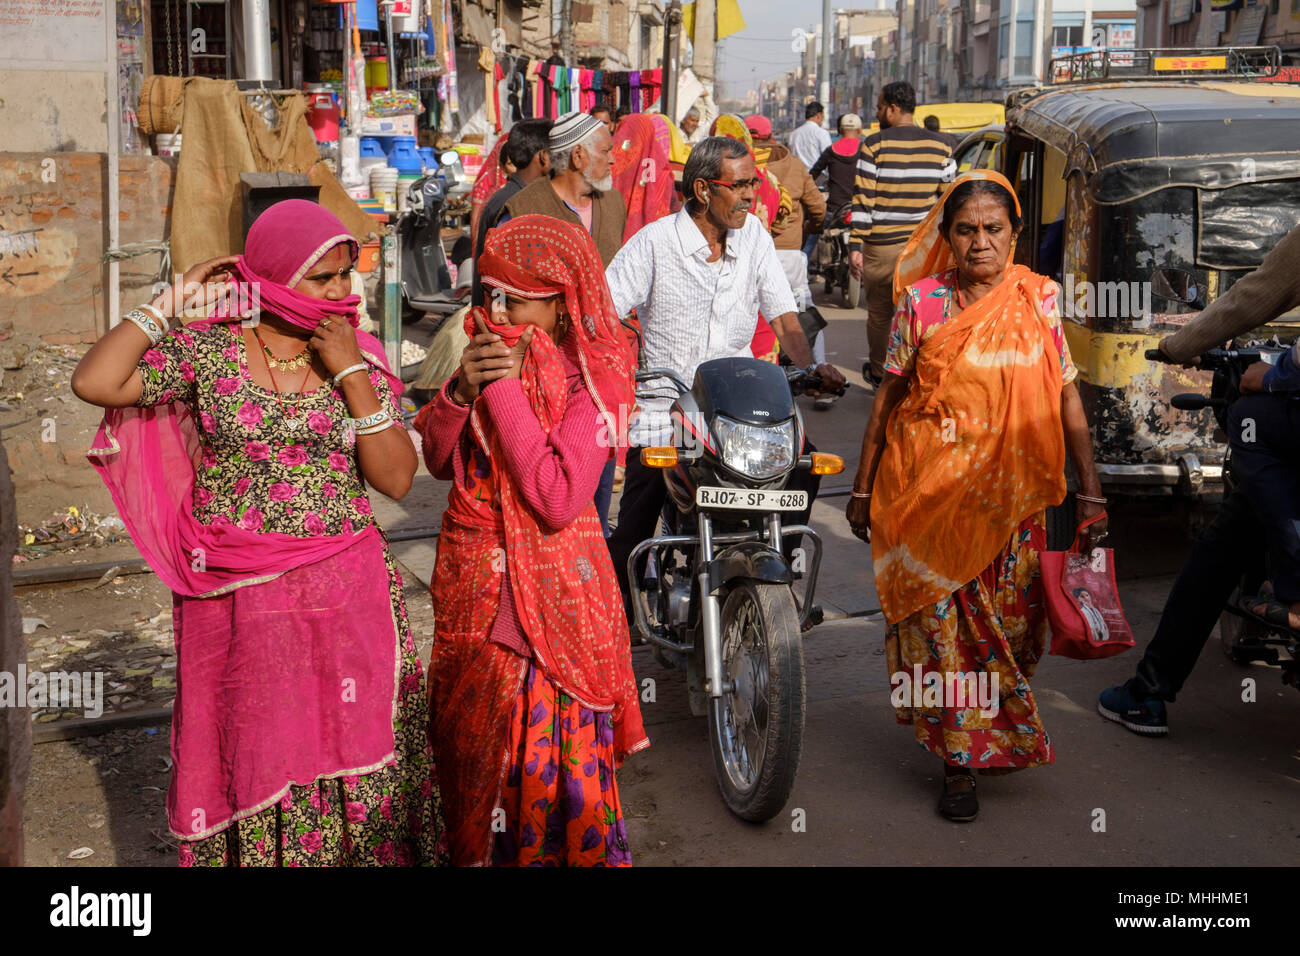 Girls covering their mouths with their headscarfs. Bikaner, Rajasthan. India Stock Photo